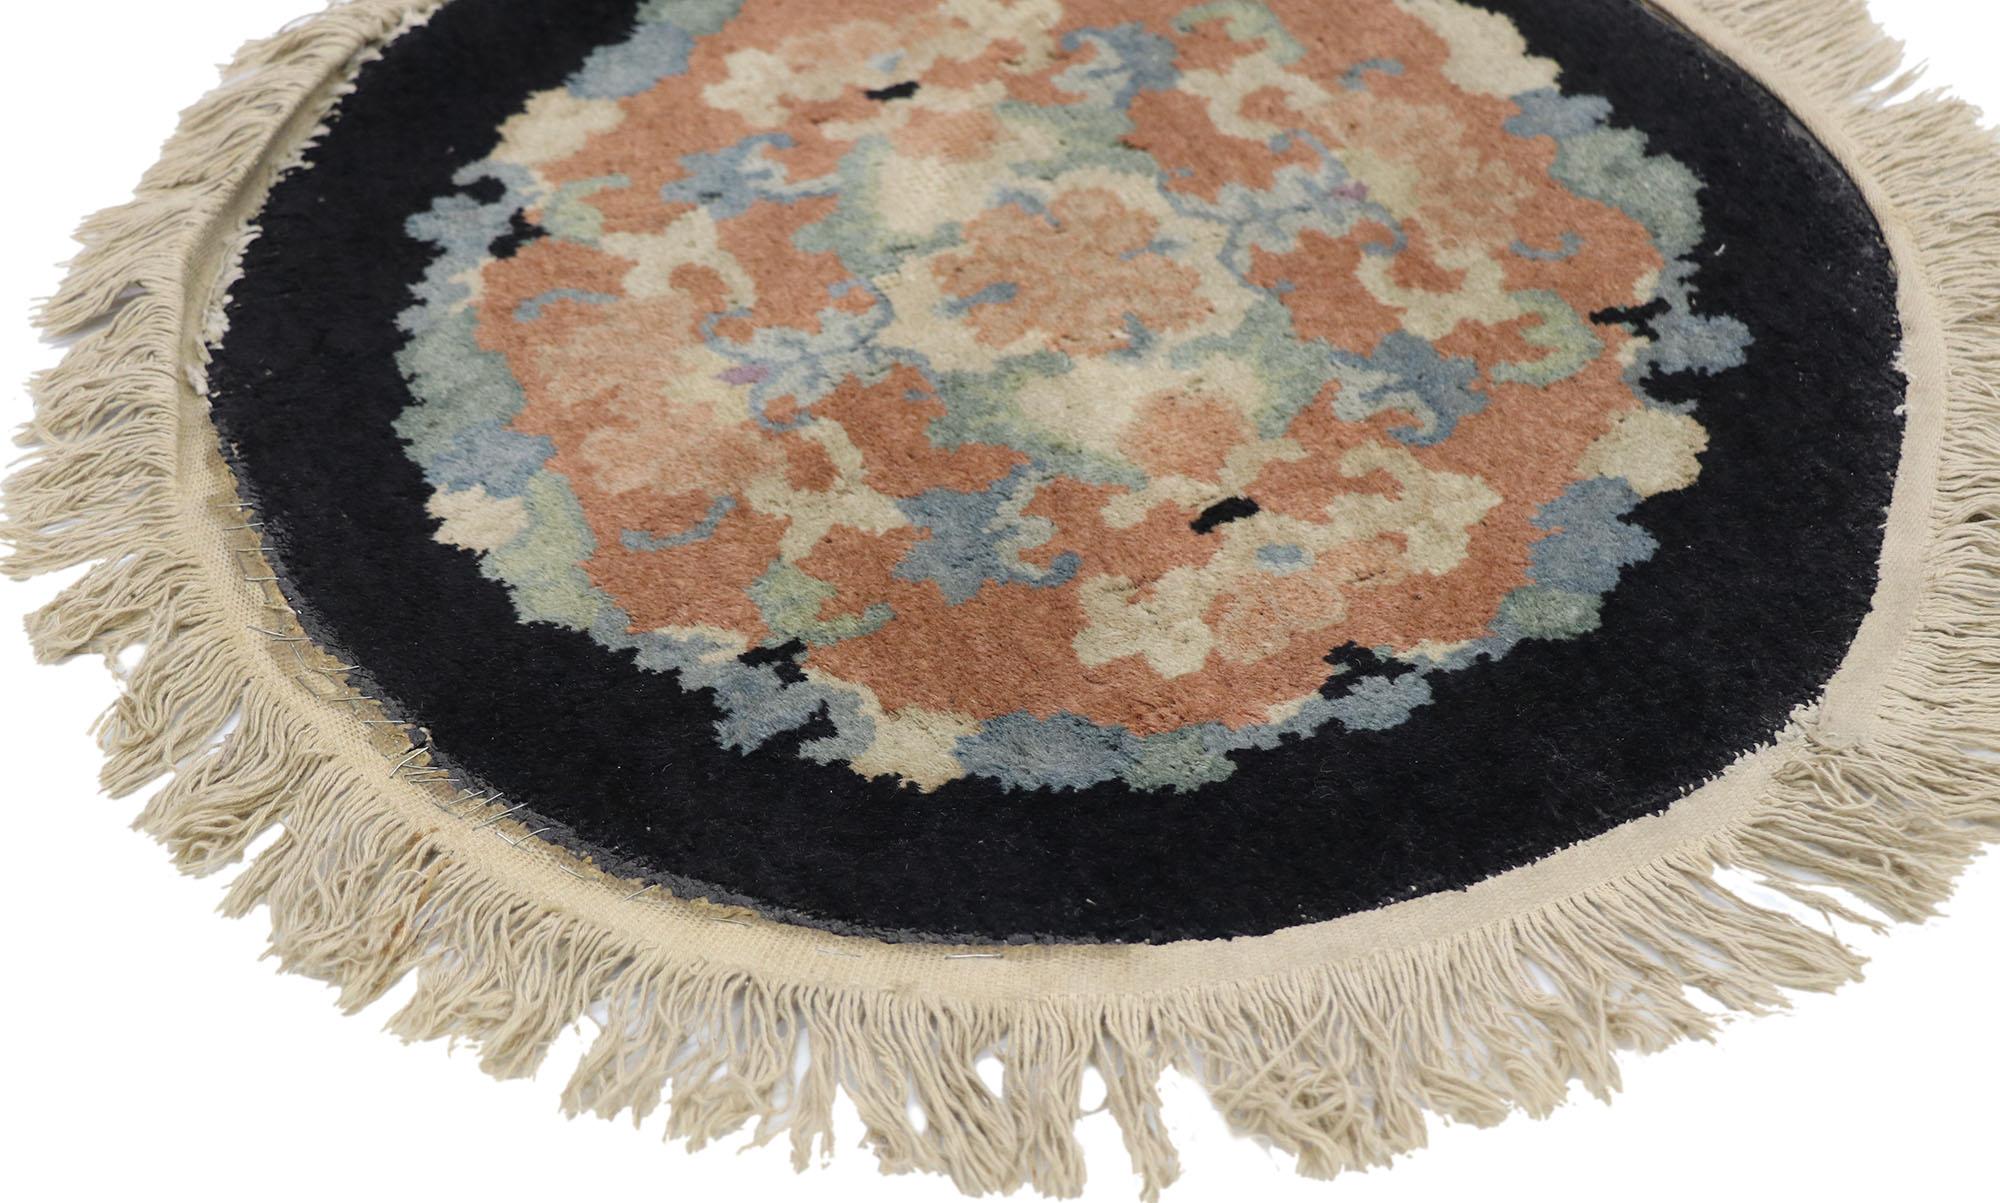 77784, antique Chinese Art Deco Round rug with European Influenced Chinoiserie style. This hand knotted wool antique Chinese Art Deco rug features a subtle all-over arabesque pattern spread across an abrashed field. The style displays a distinct